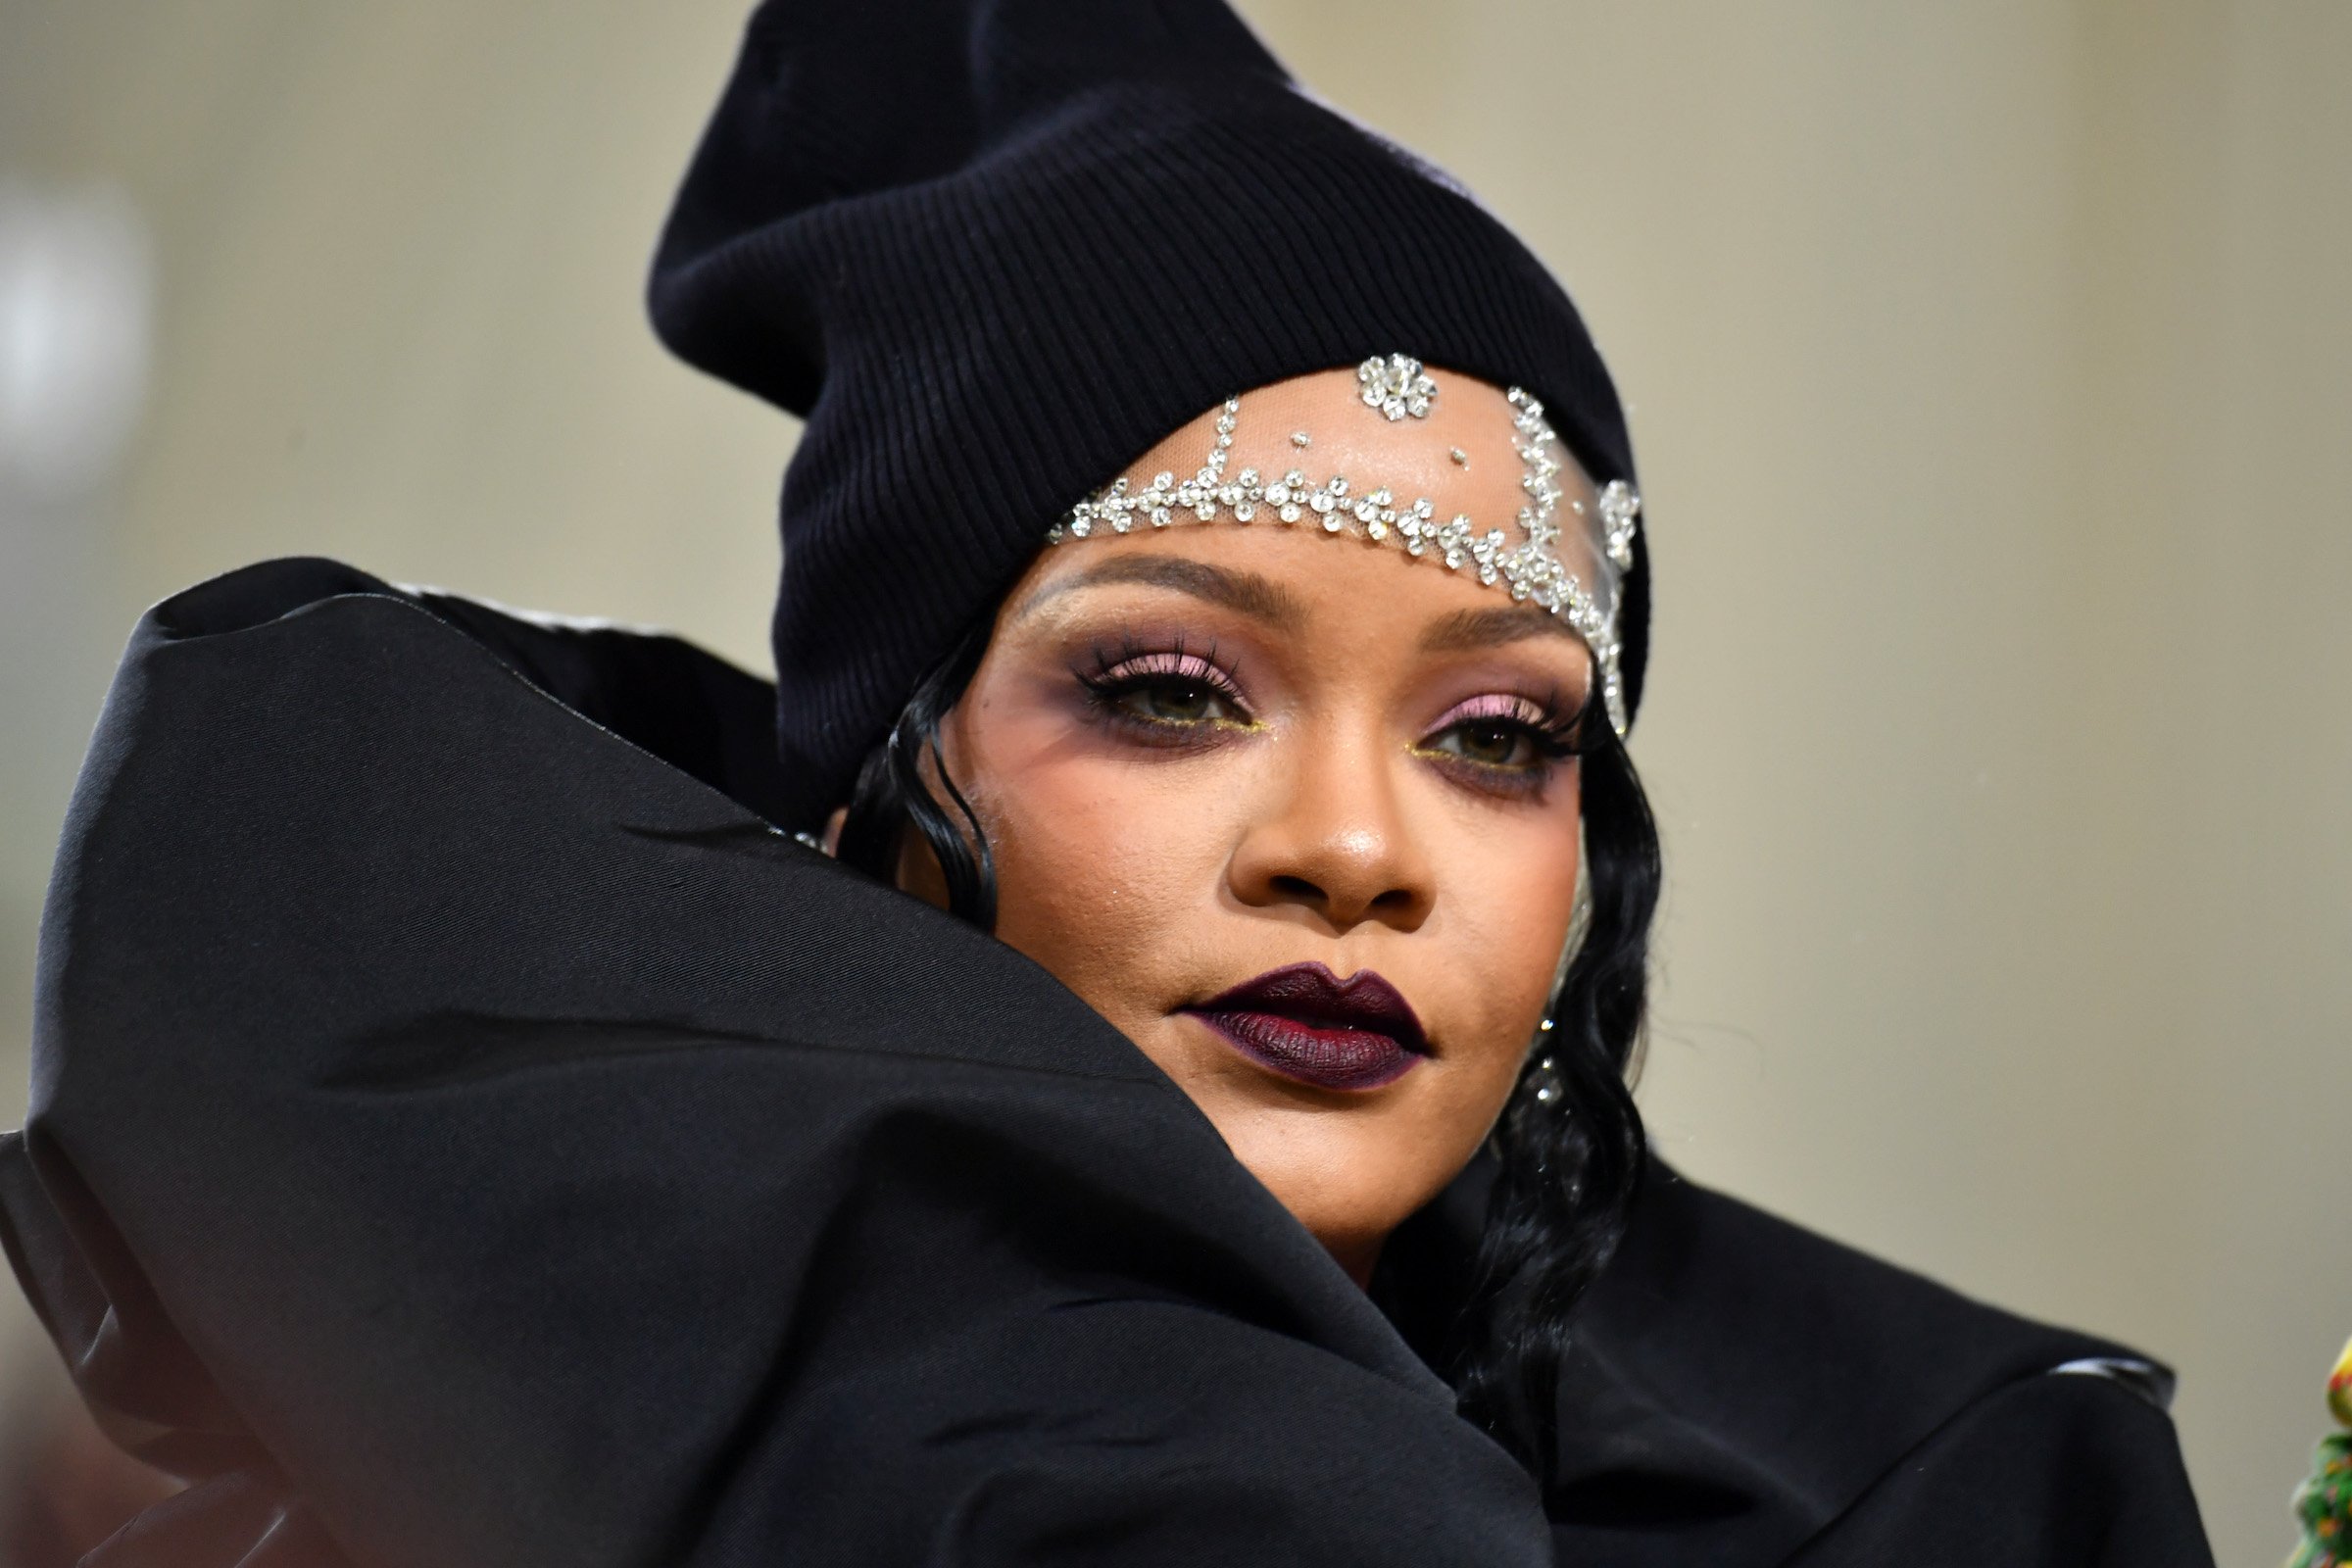 Rihanna, who previously retired from the Super Bowl to support Colin Kaepernick, wore black to the Met Gala